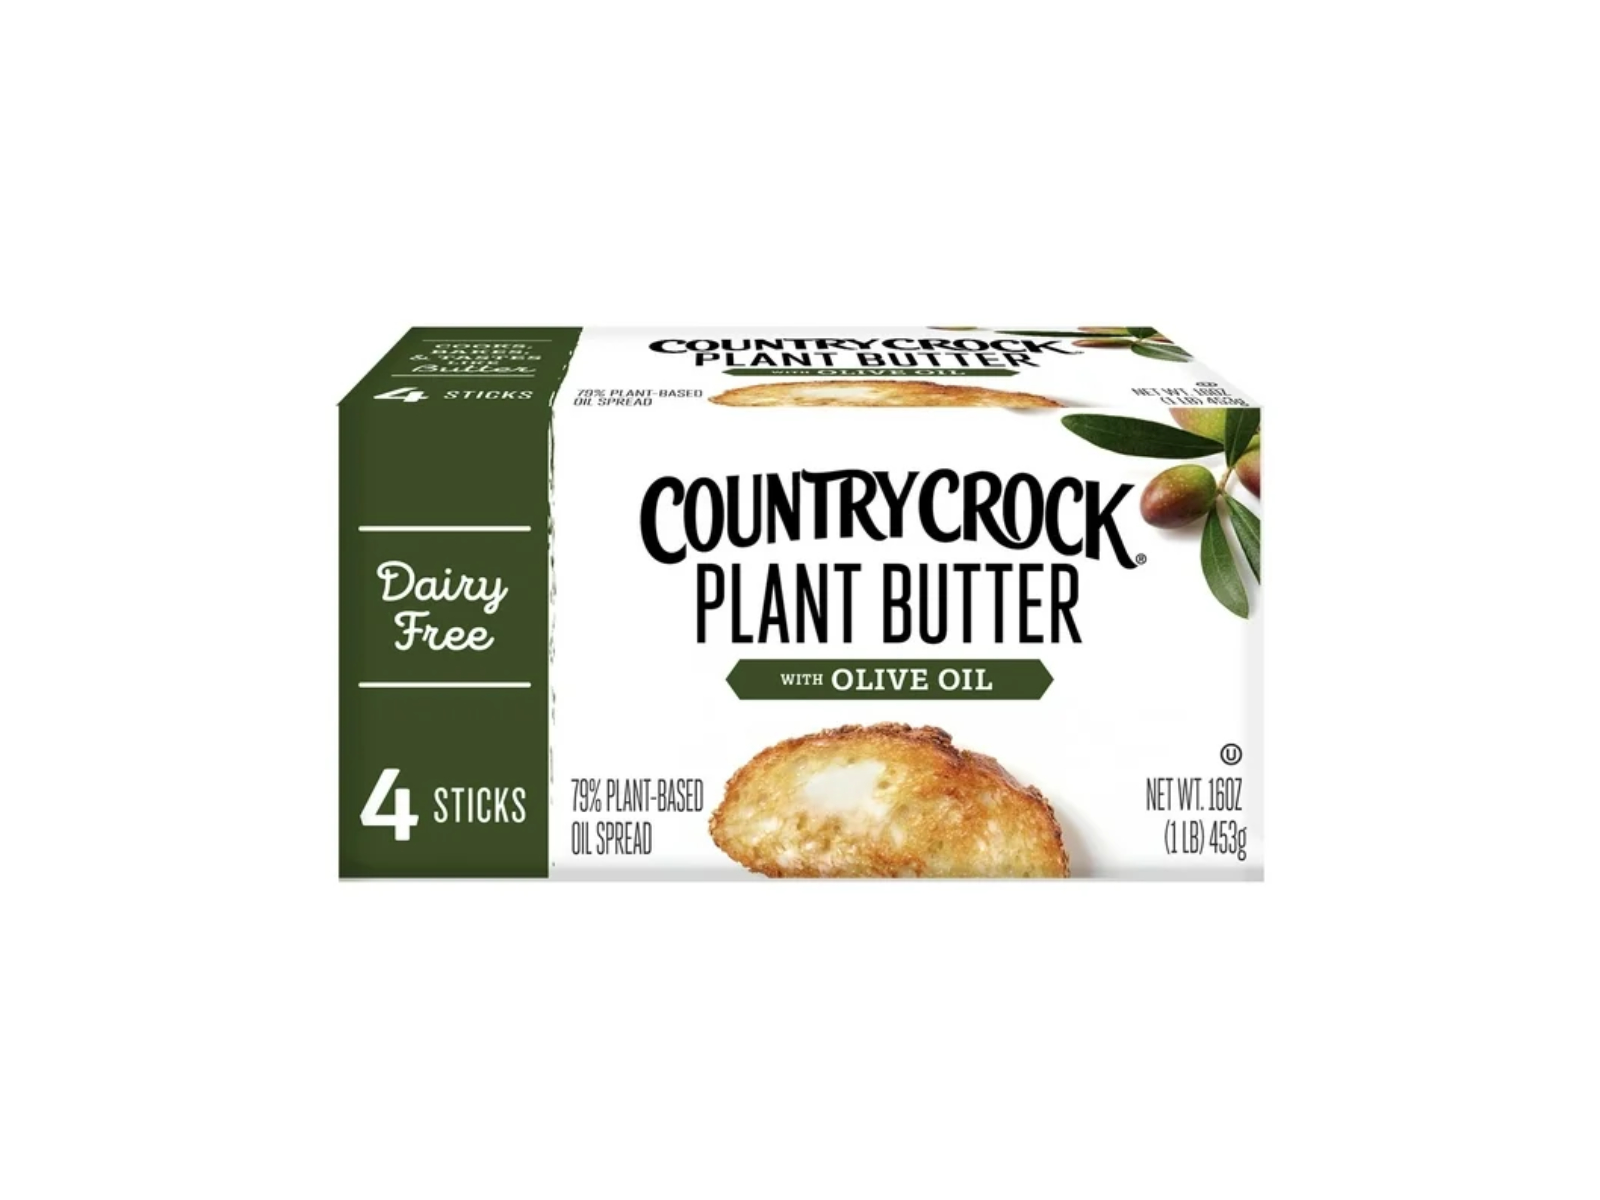 Country Crock Dairy Free Plant Butter with Olive Oil